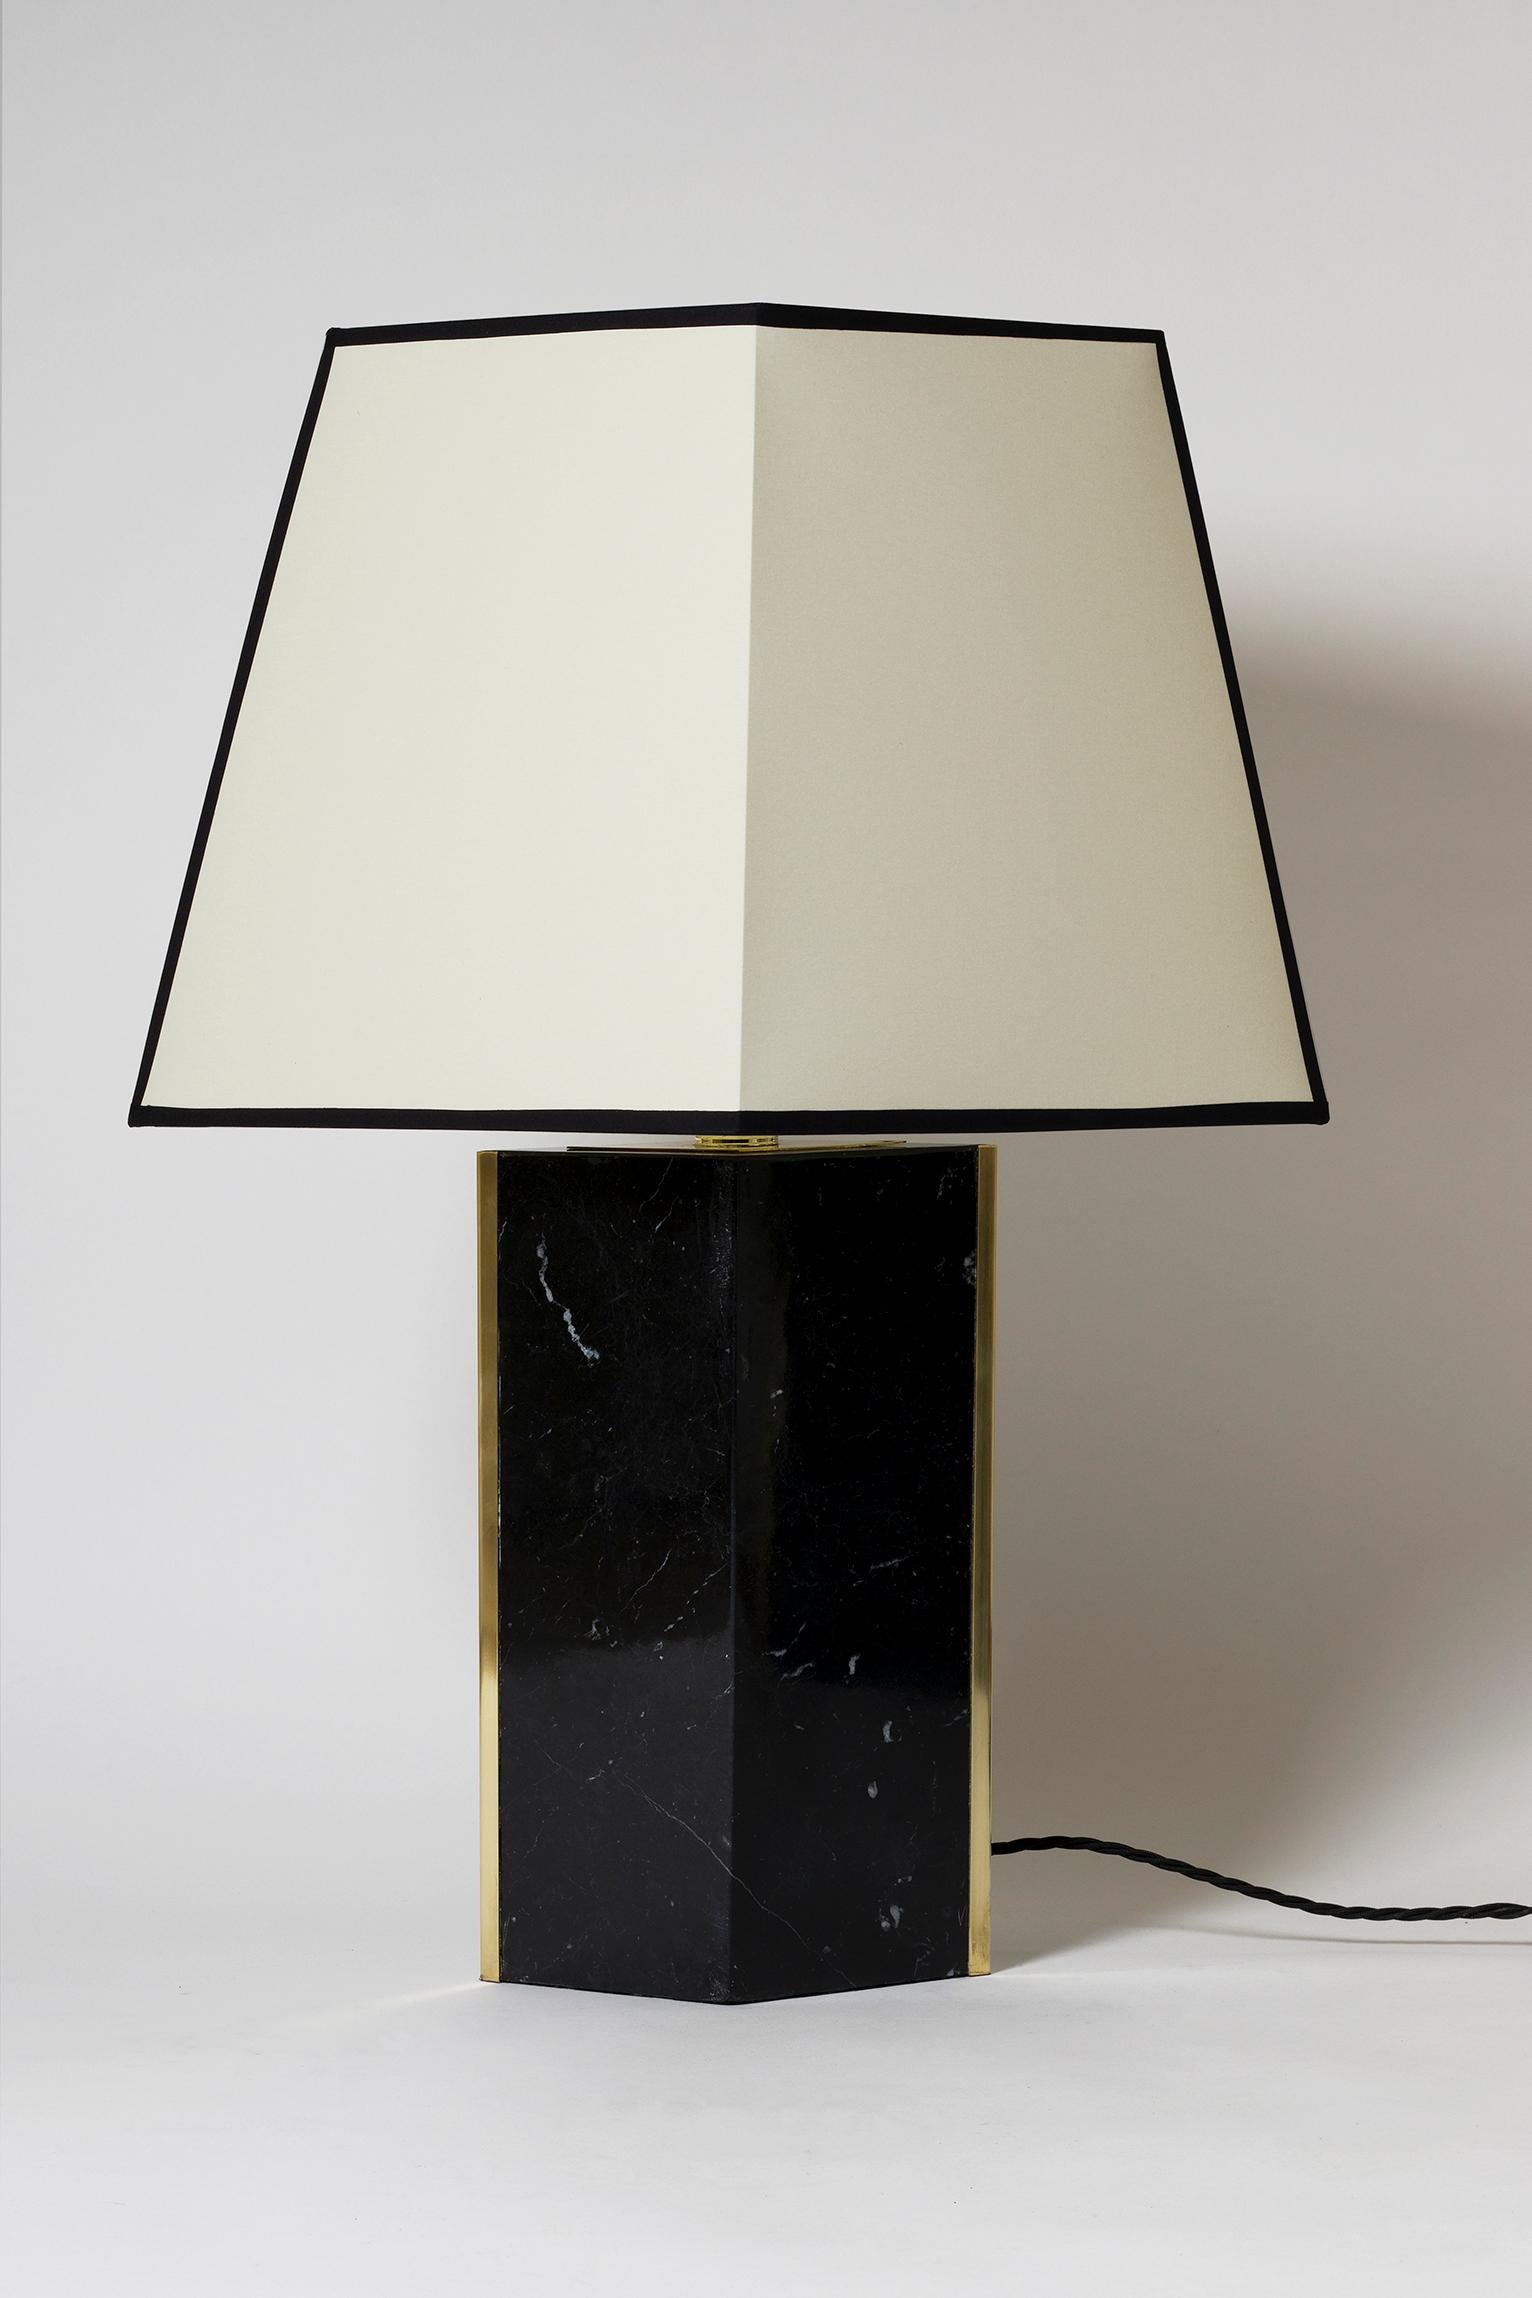 British 'Marine' Black Marble and Brass Table Lamp, by Dorian Caffot de Fawes